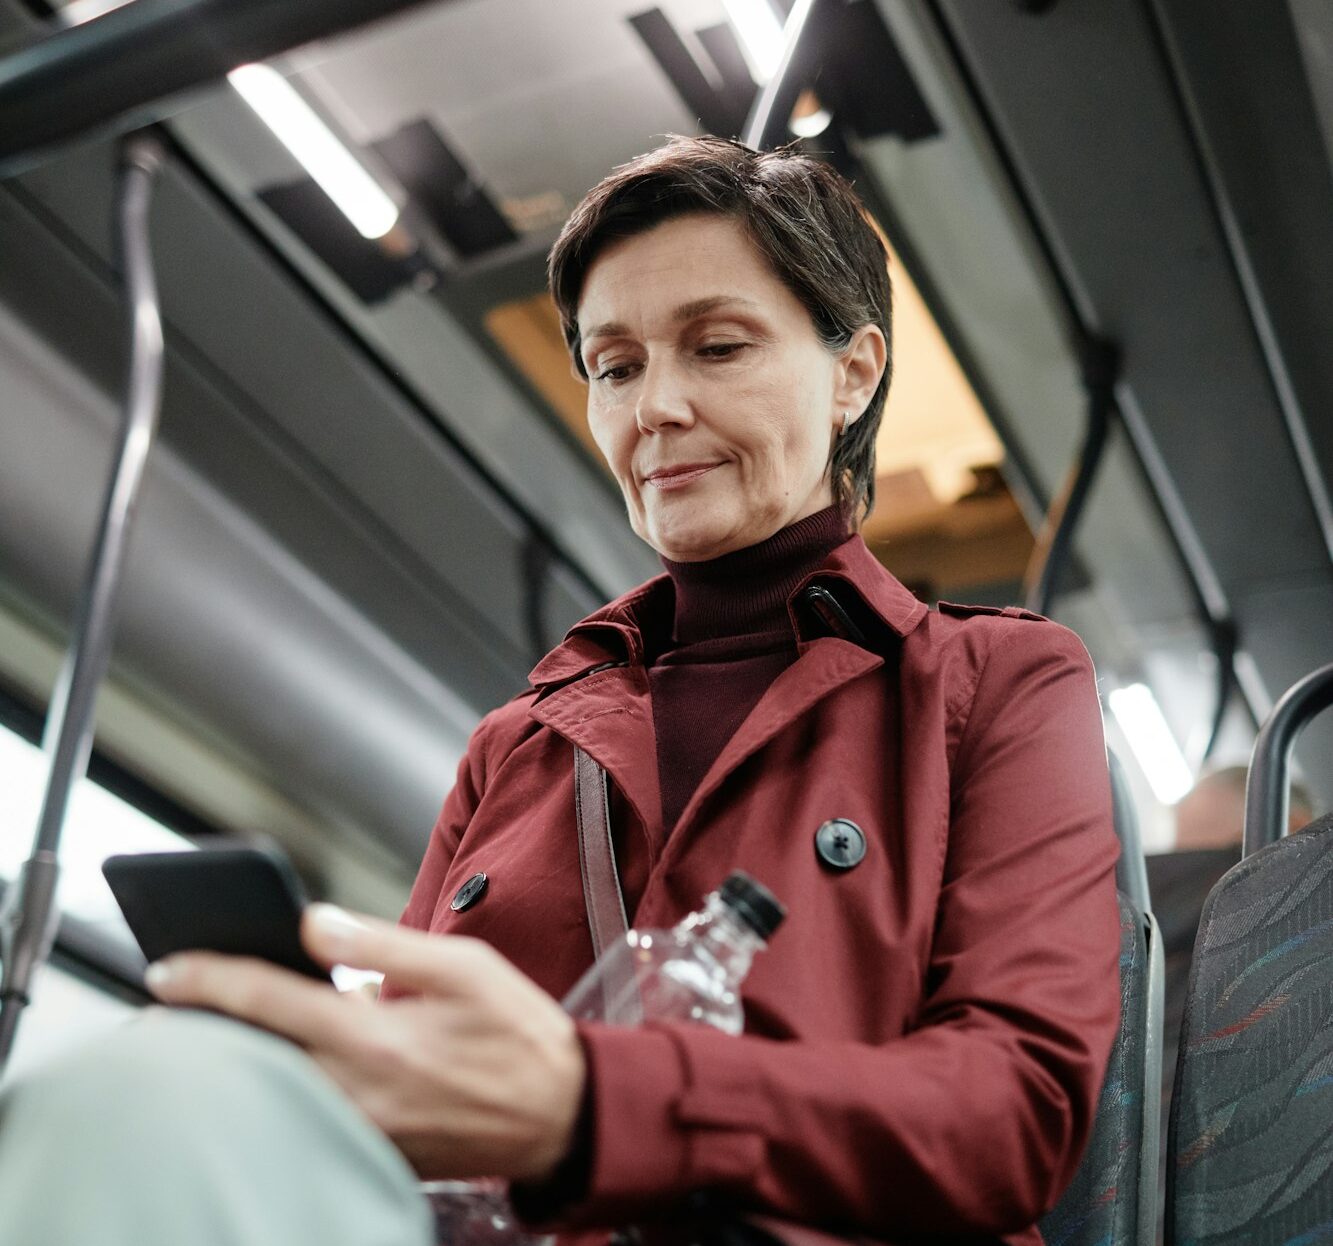 Adult Woman Traveling by Bus in City